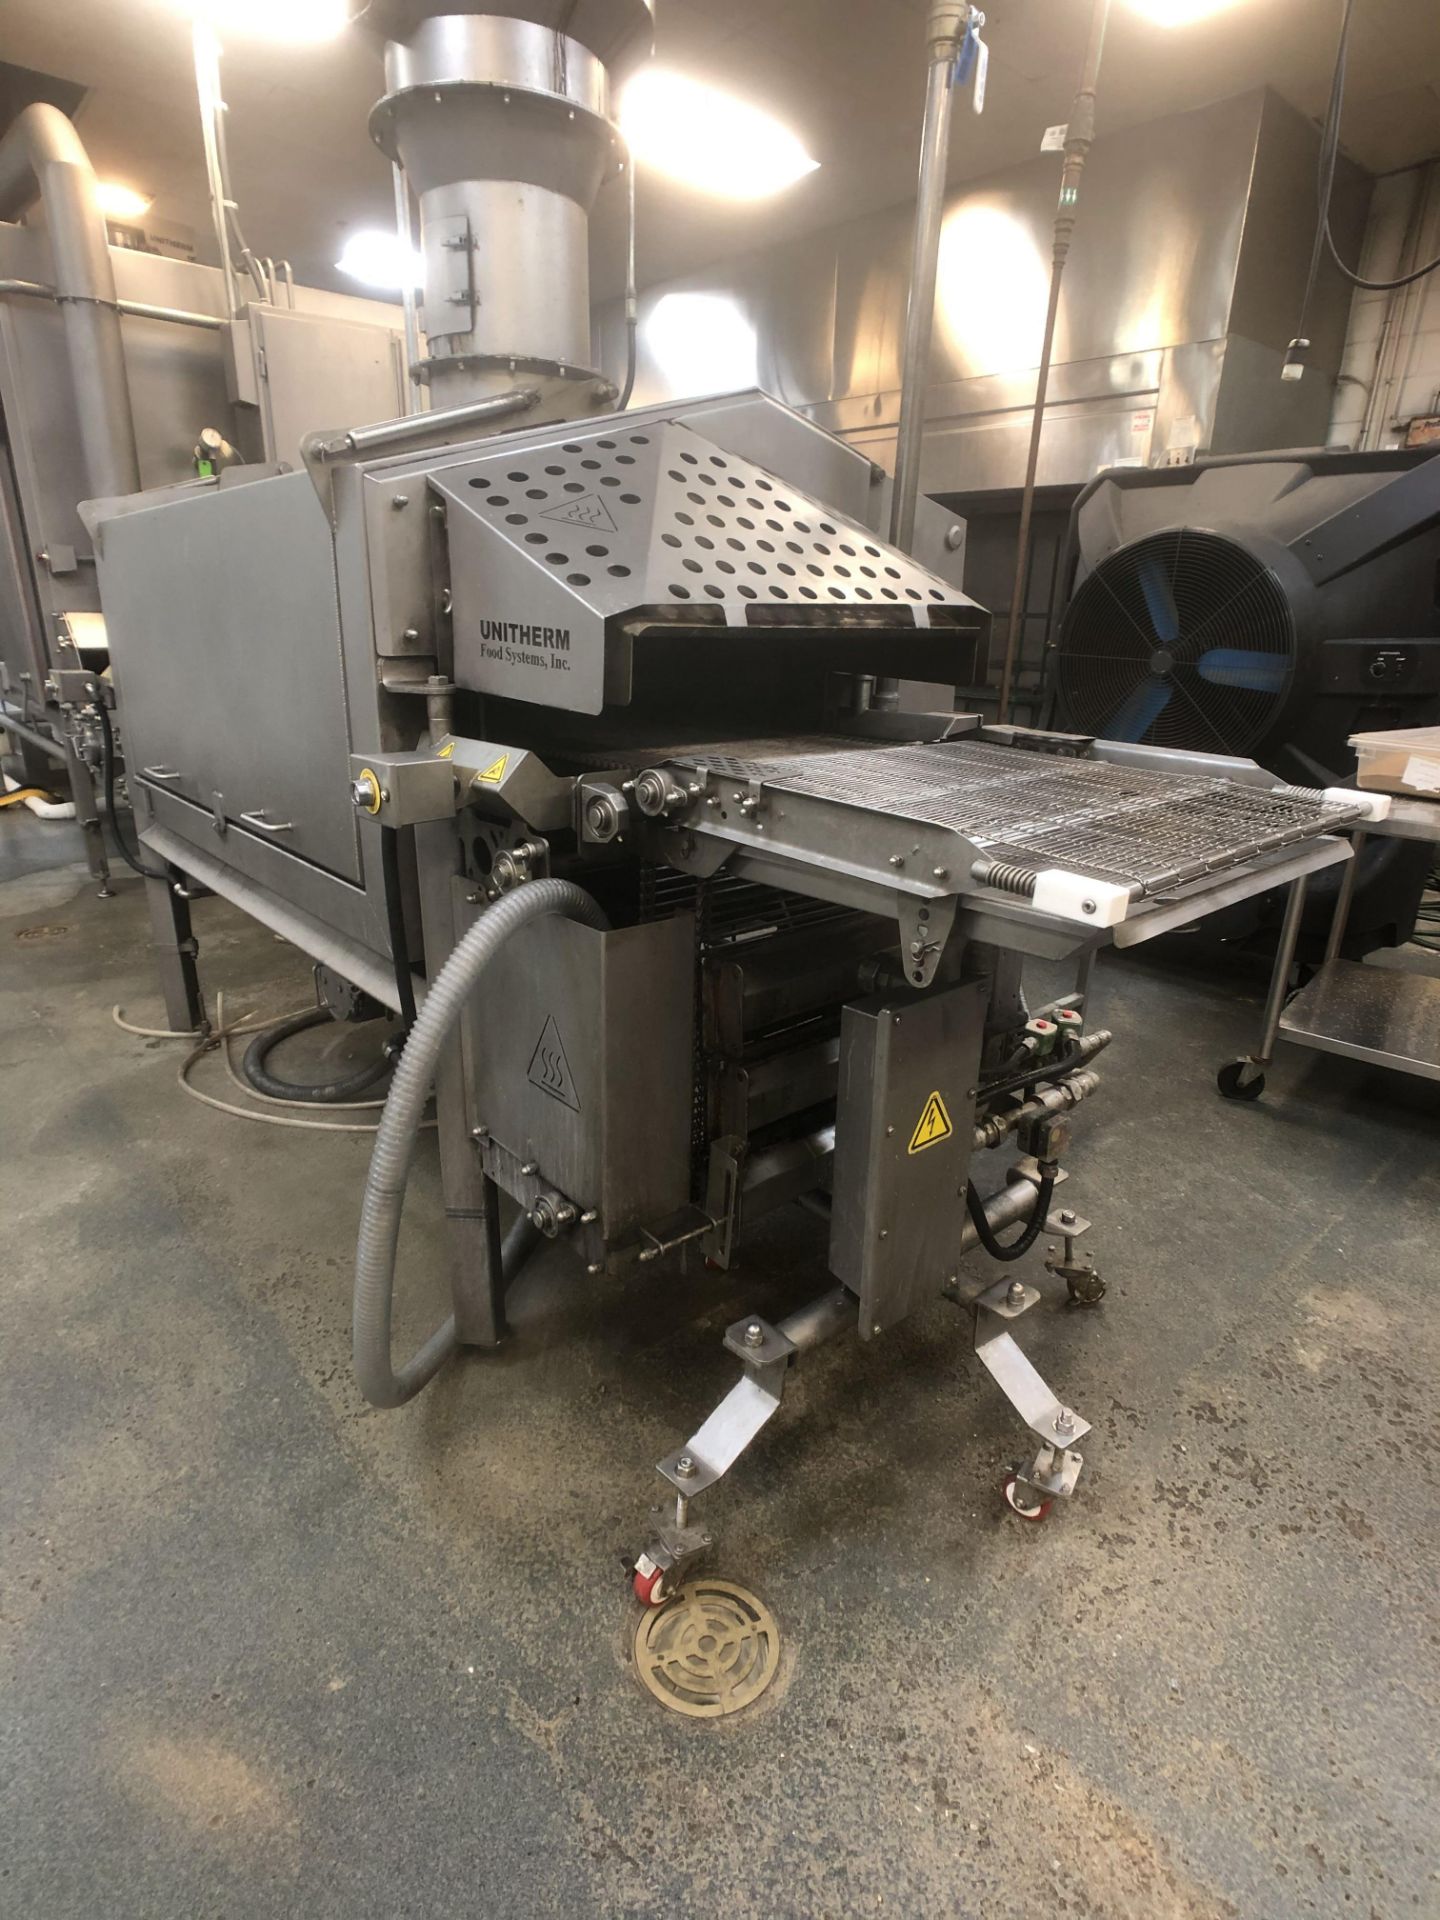 2019 Unitherm Food Systems 24" Flame Grill with Preheat, Model FG-24-8B-P, S/N FLGR-2485, Includes - Image 7 of 19